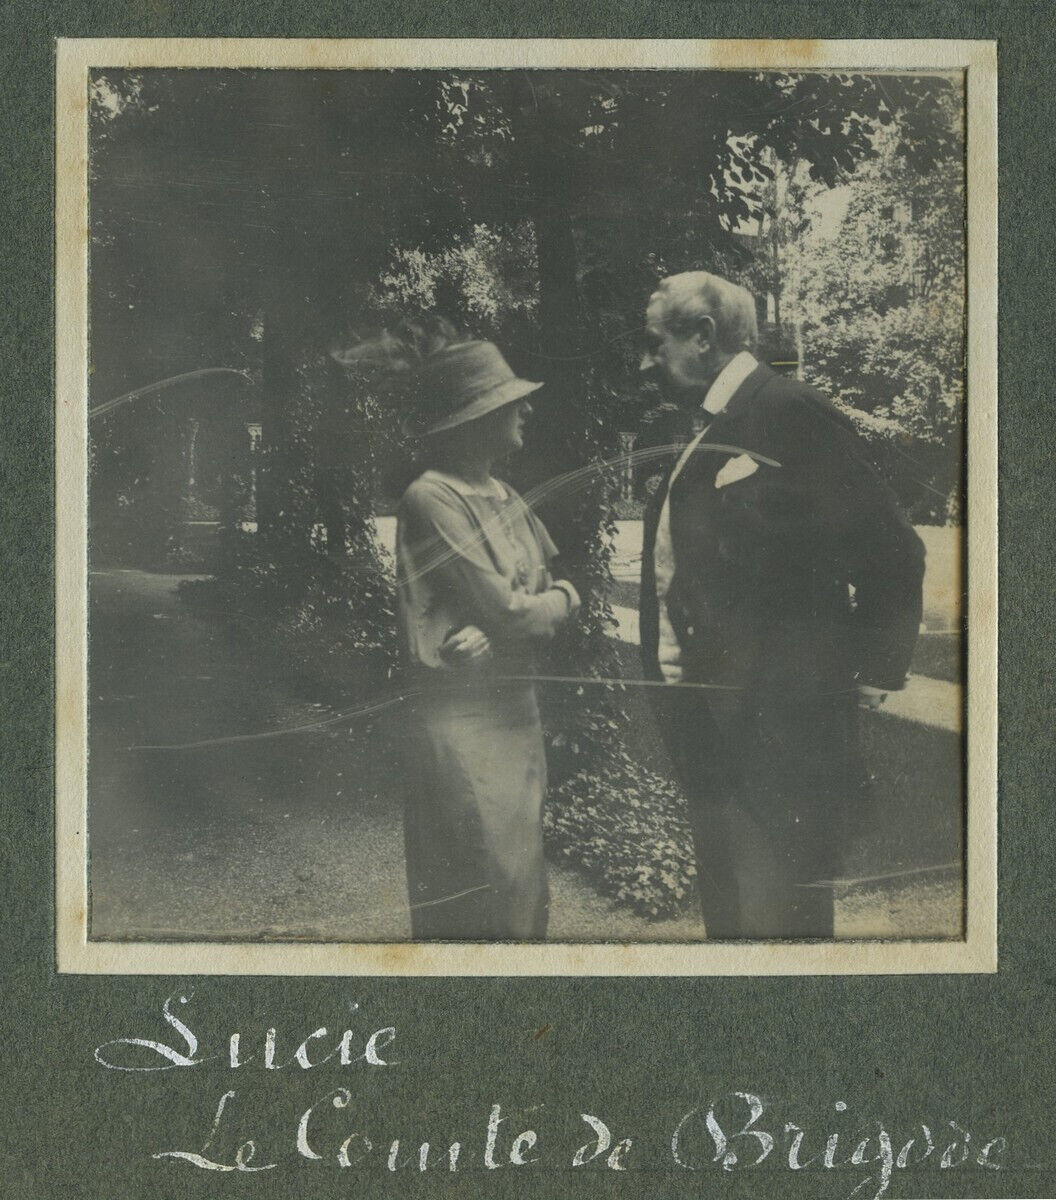 Ernesta Stern Fund. Louise Stern and the Count of Brigode. 1923-24. Judaica.